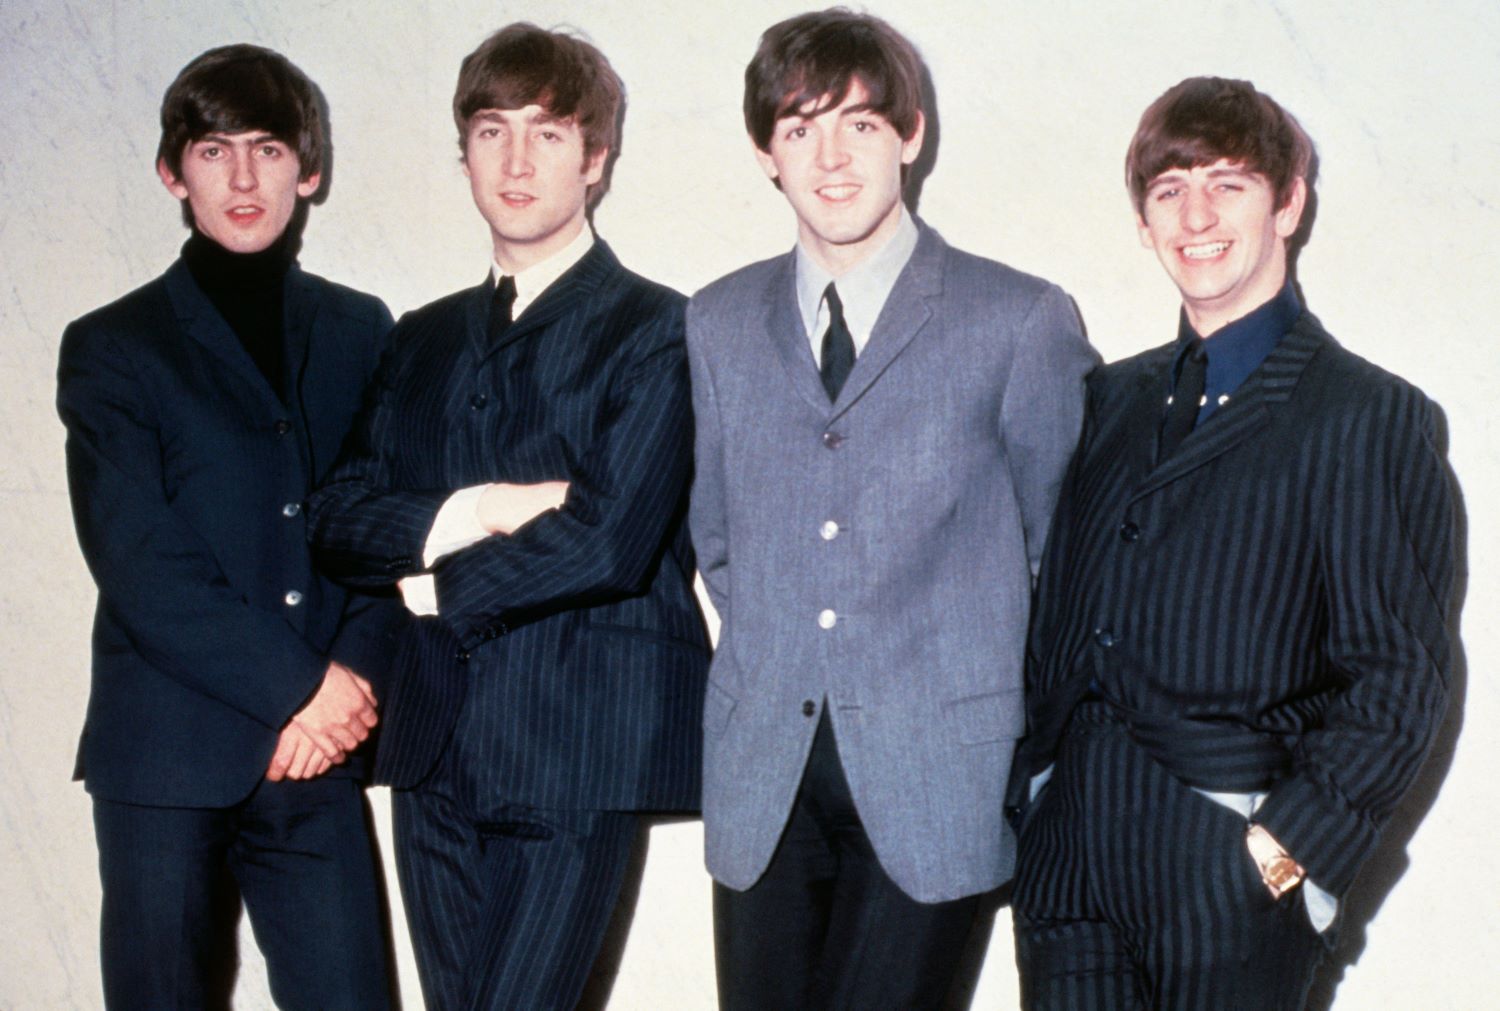 Beatles Songs A to Z: A Fact for Every Beatles Song